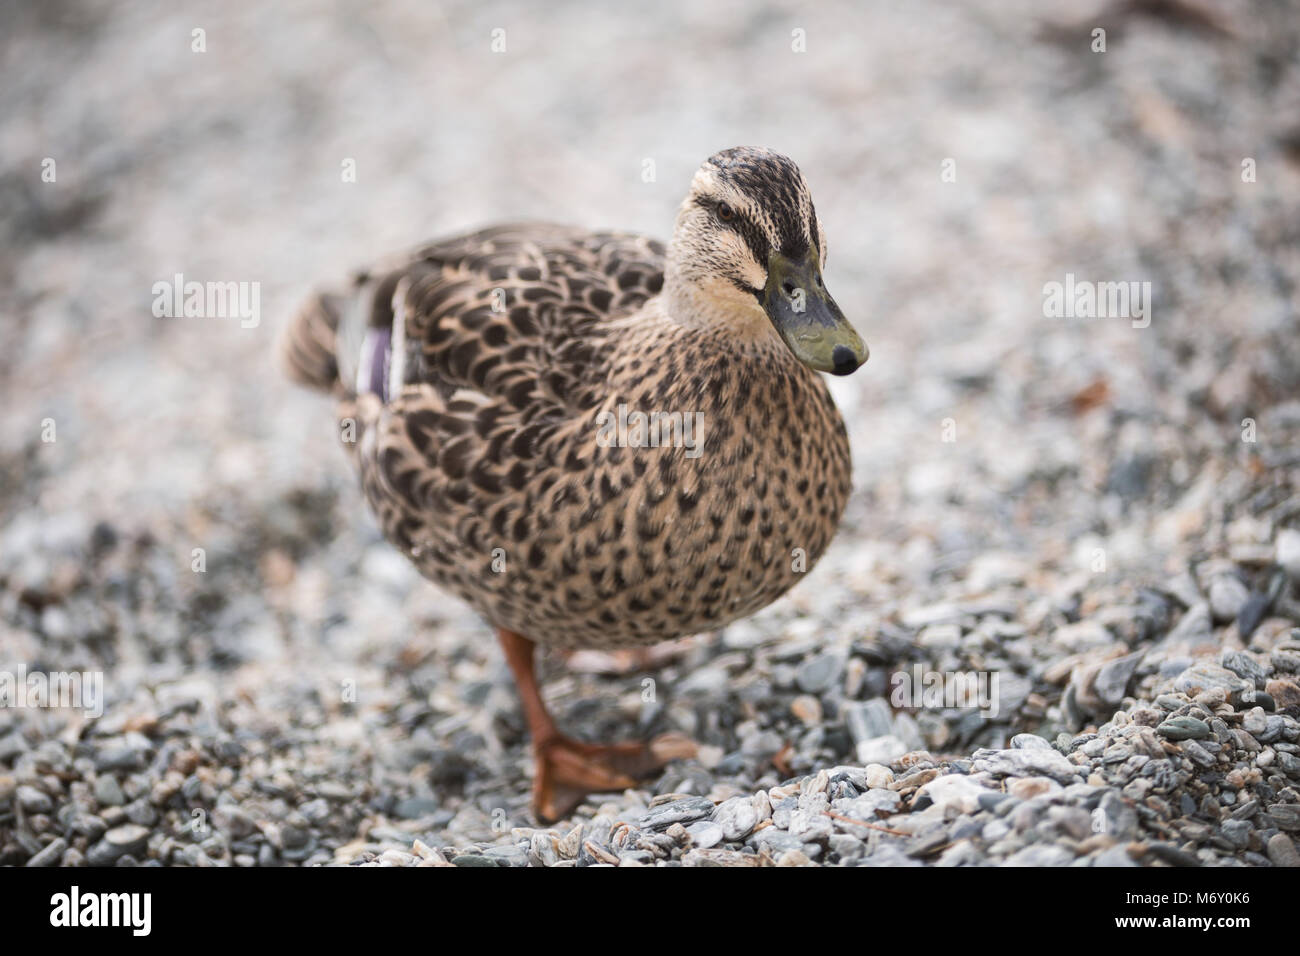 Birds and animals in wildlife. Amazing closeup view of brown mallard female duck on stone under sunlight with others swimming nearby in water of park  Stock Photo